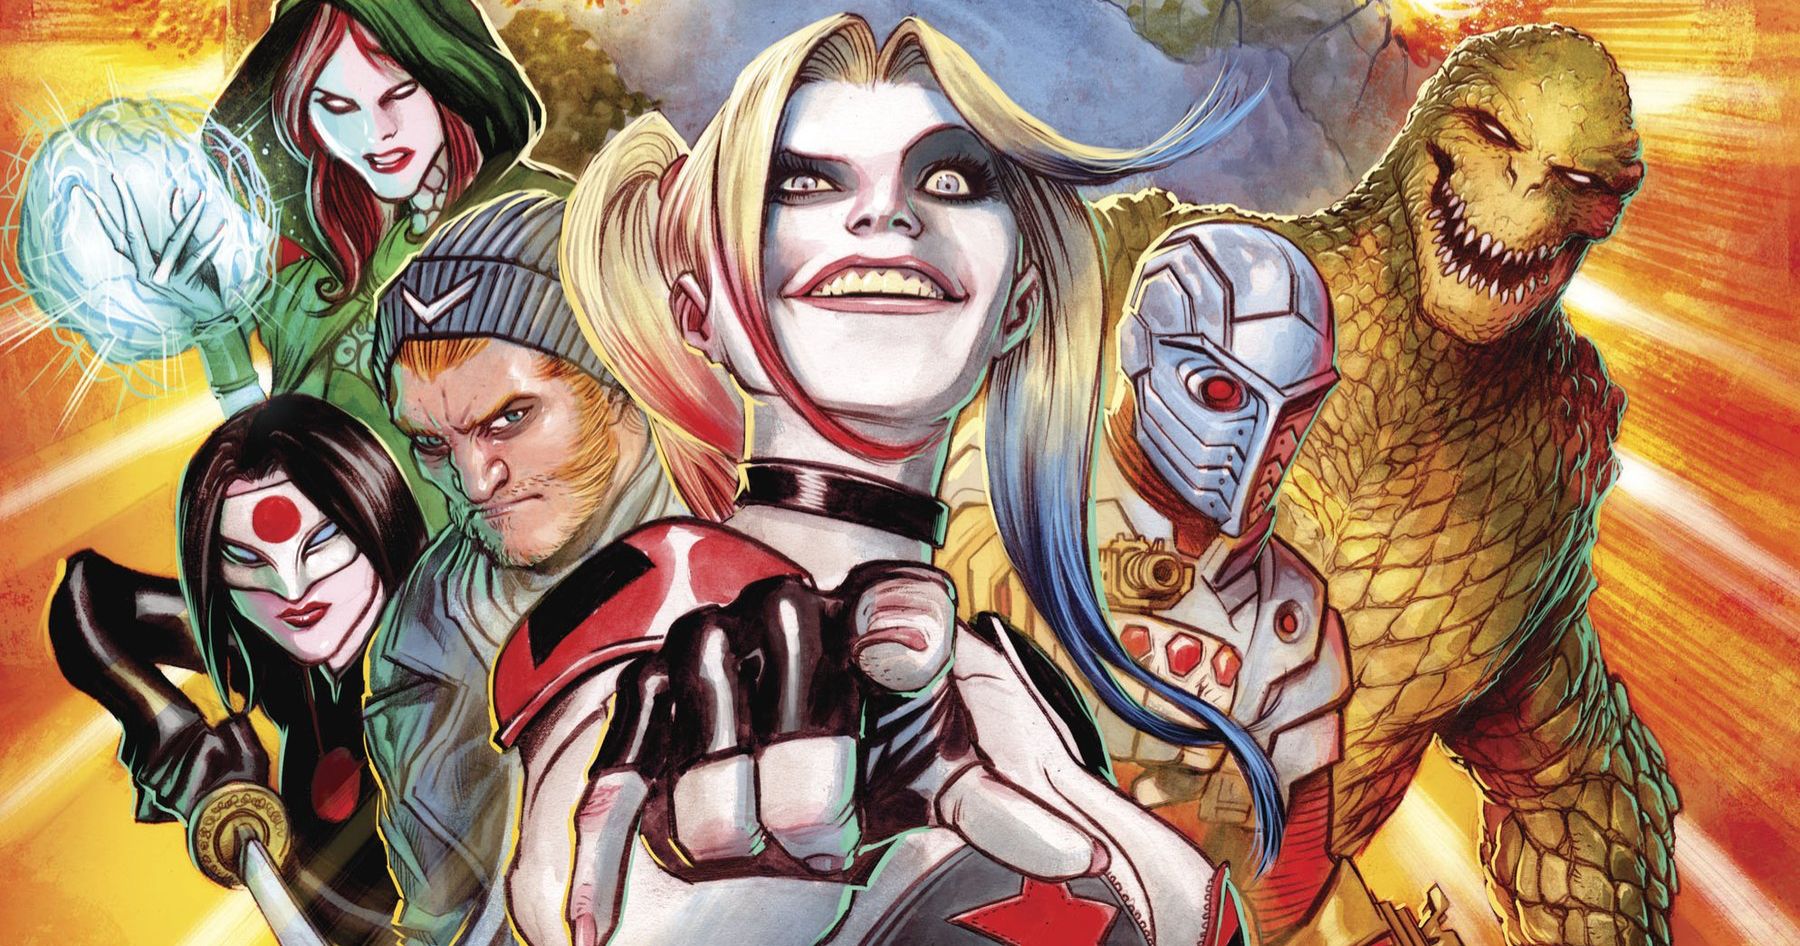 James Gunn Read Every Suicide Squad Comic Book to Prepare for His First DC Movie